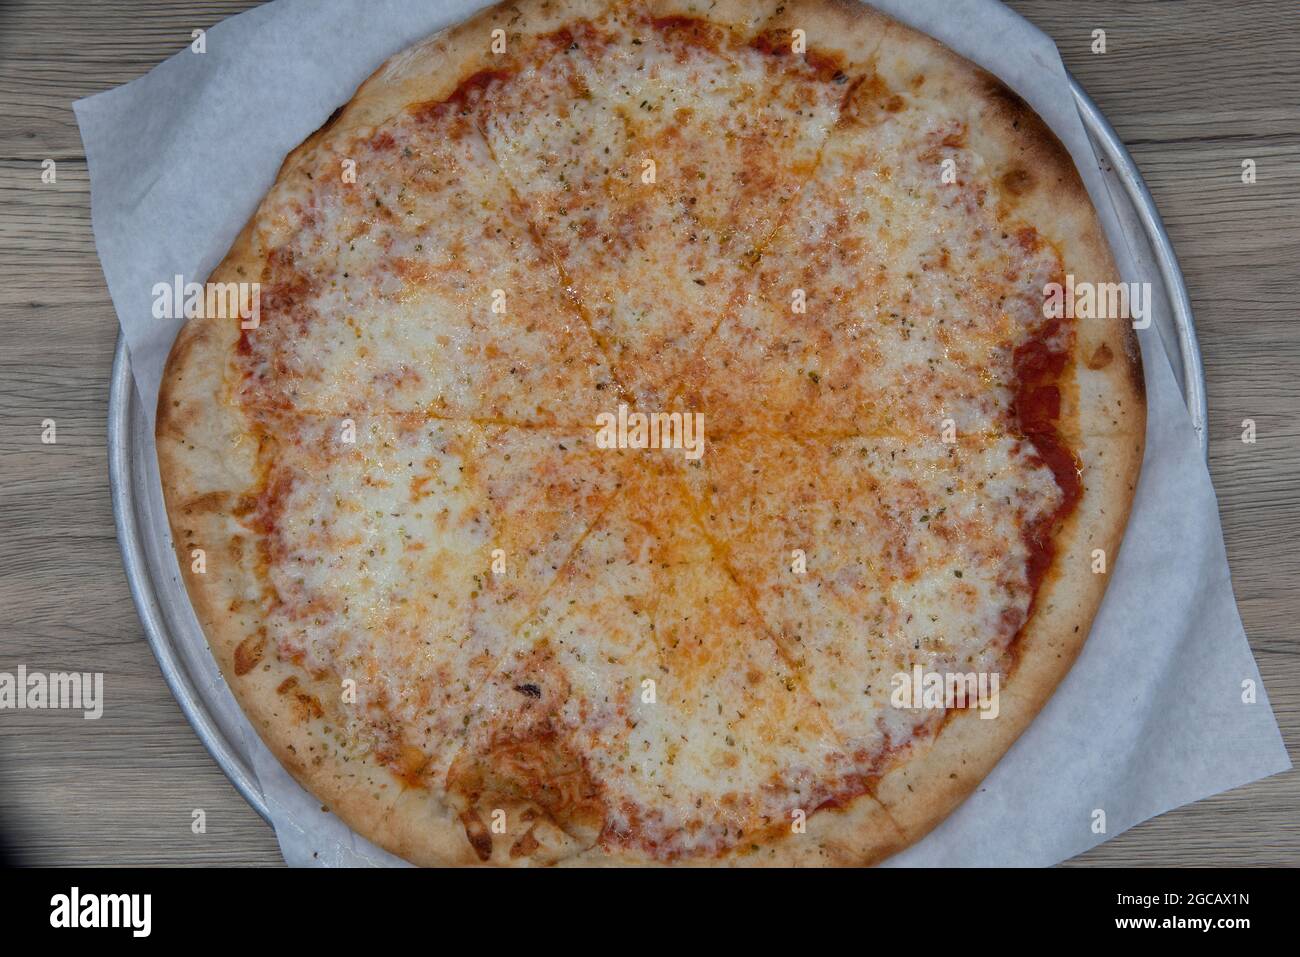 Overhead view of cheese pizza loaded with vegetable toppings and a crispy crust for a full family meal. Stock Photo